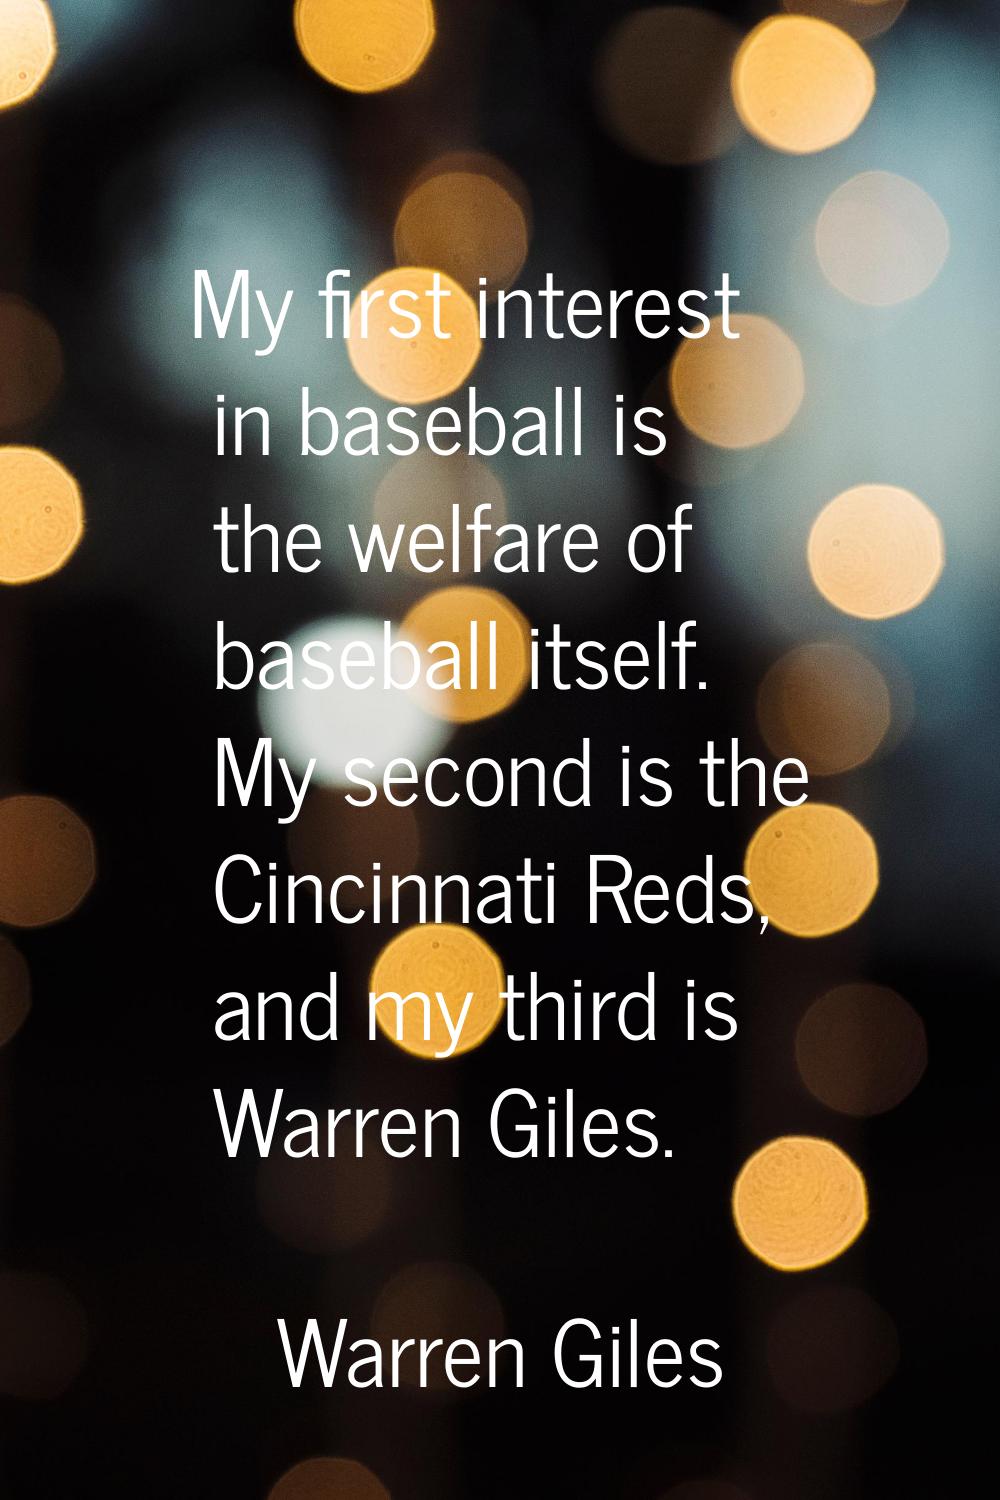 My first interest in baseball is the welfare of baseball itself. My second is the Cincinnati Reds, 